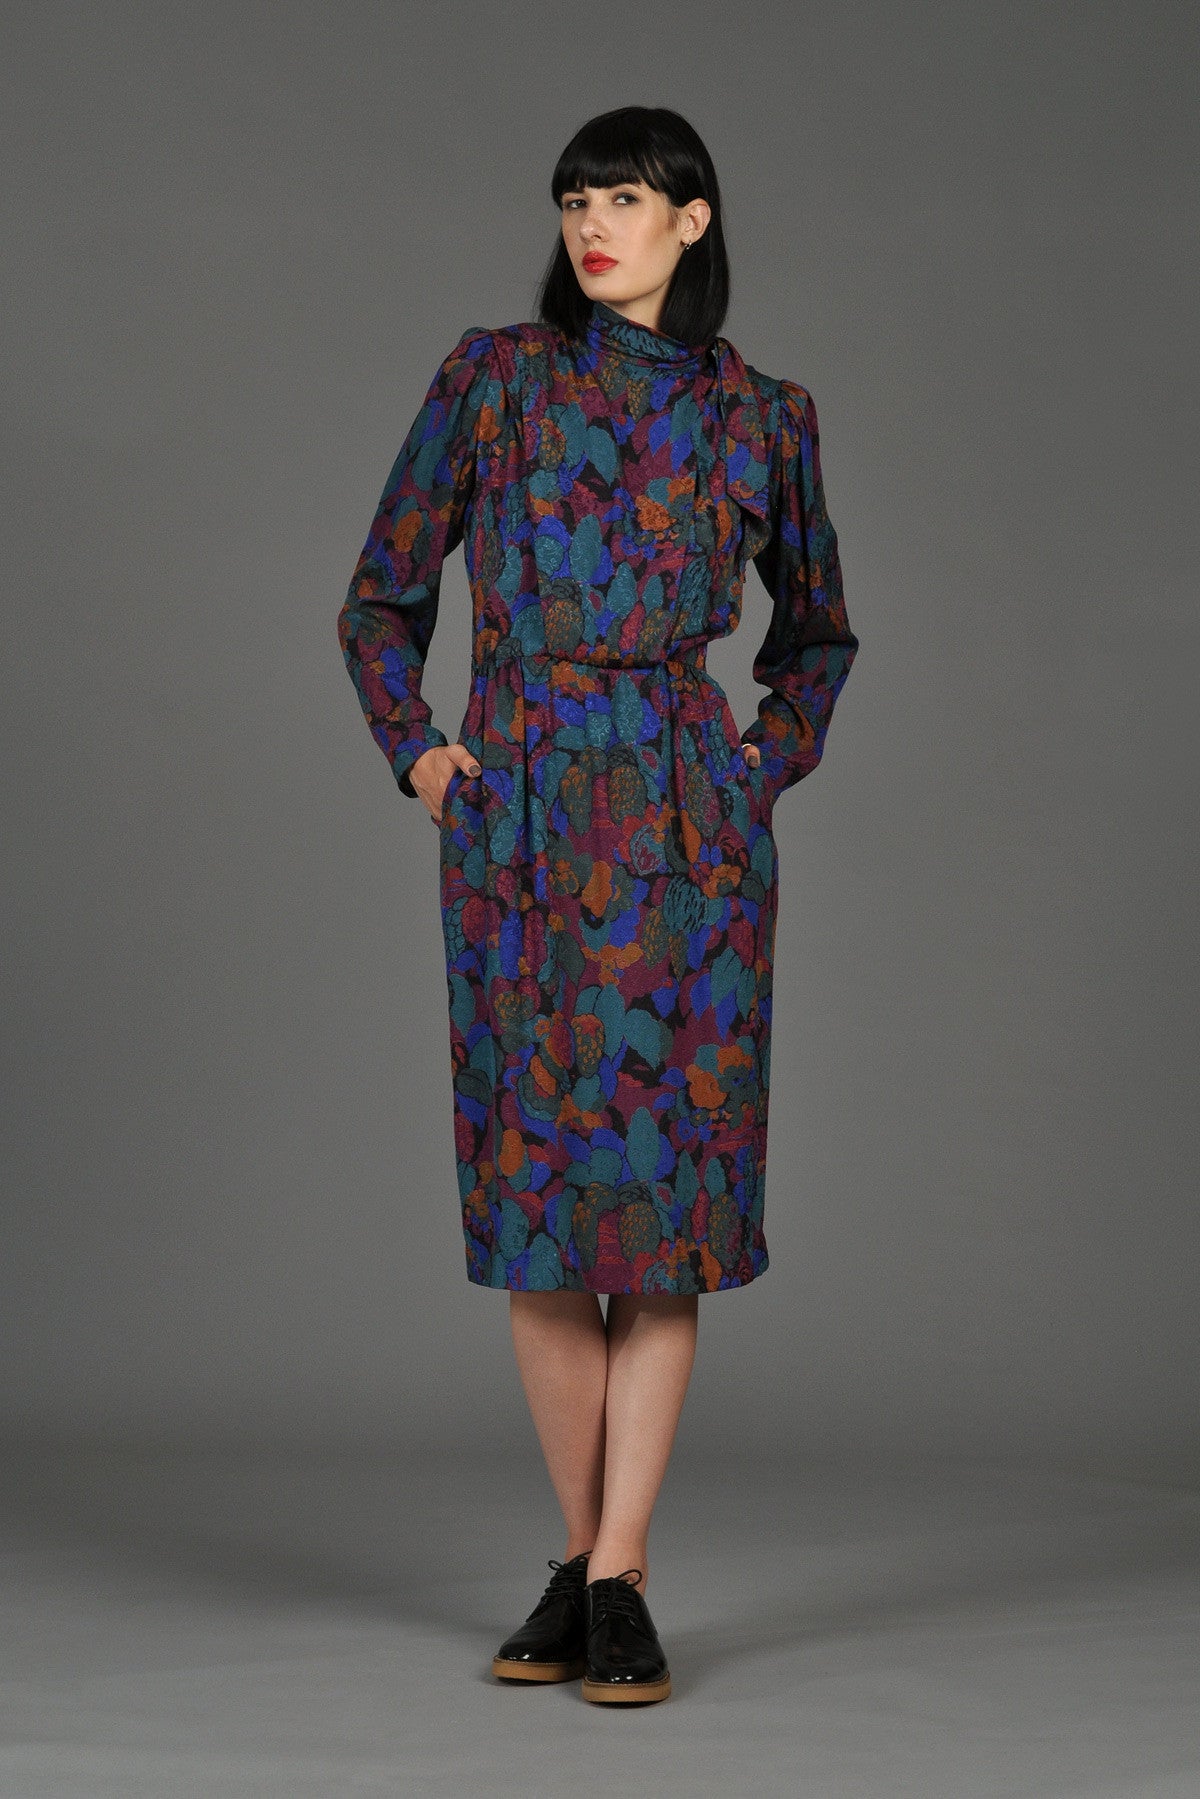 Ungaro 1980s Floral Silk Dress with Ascot